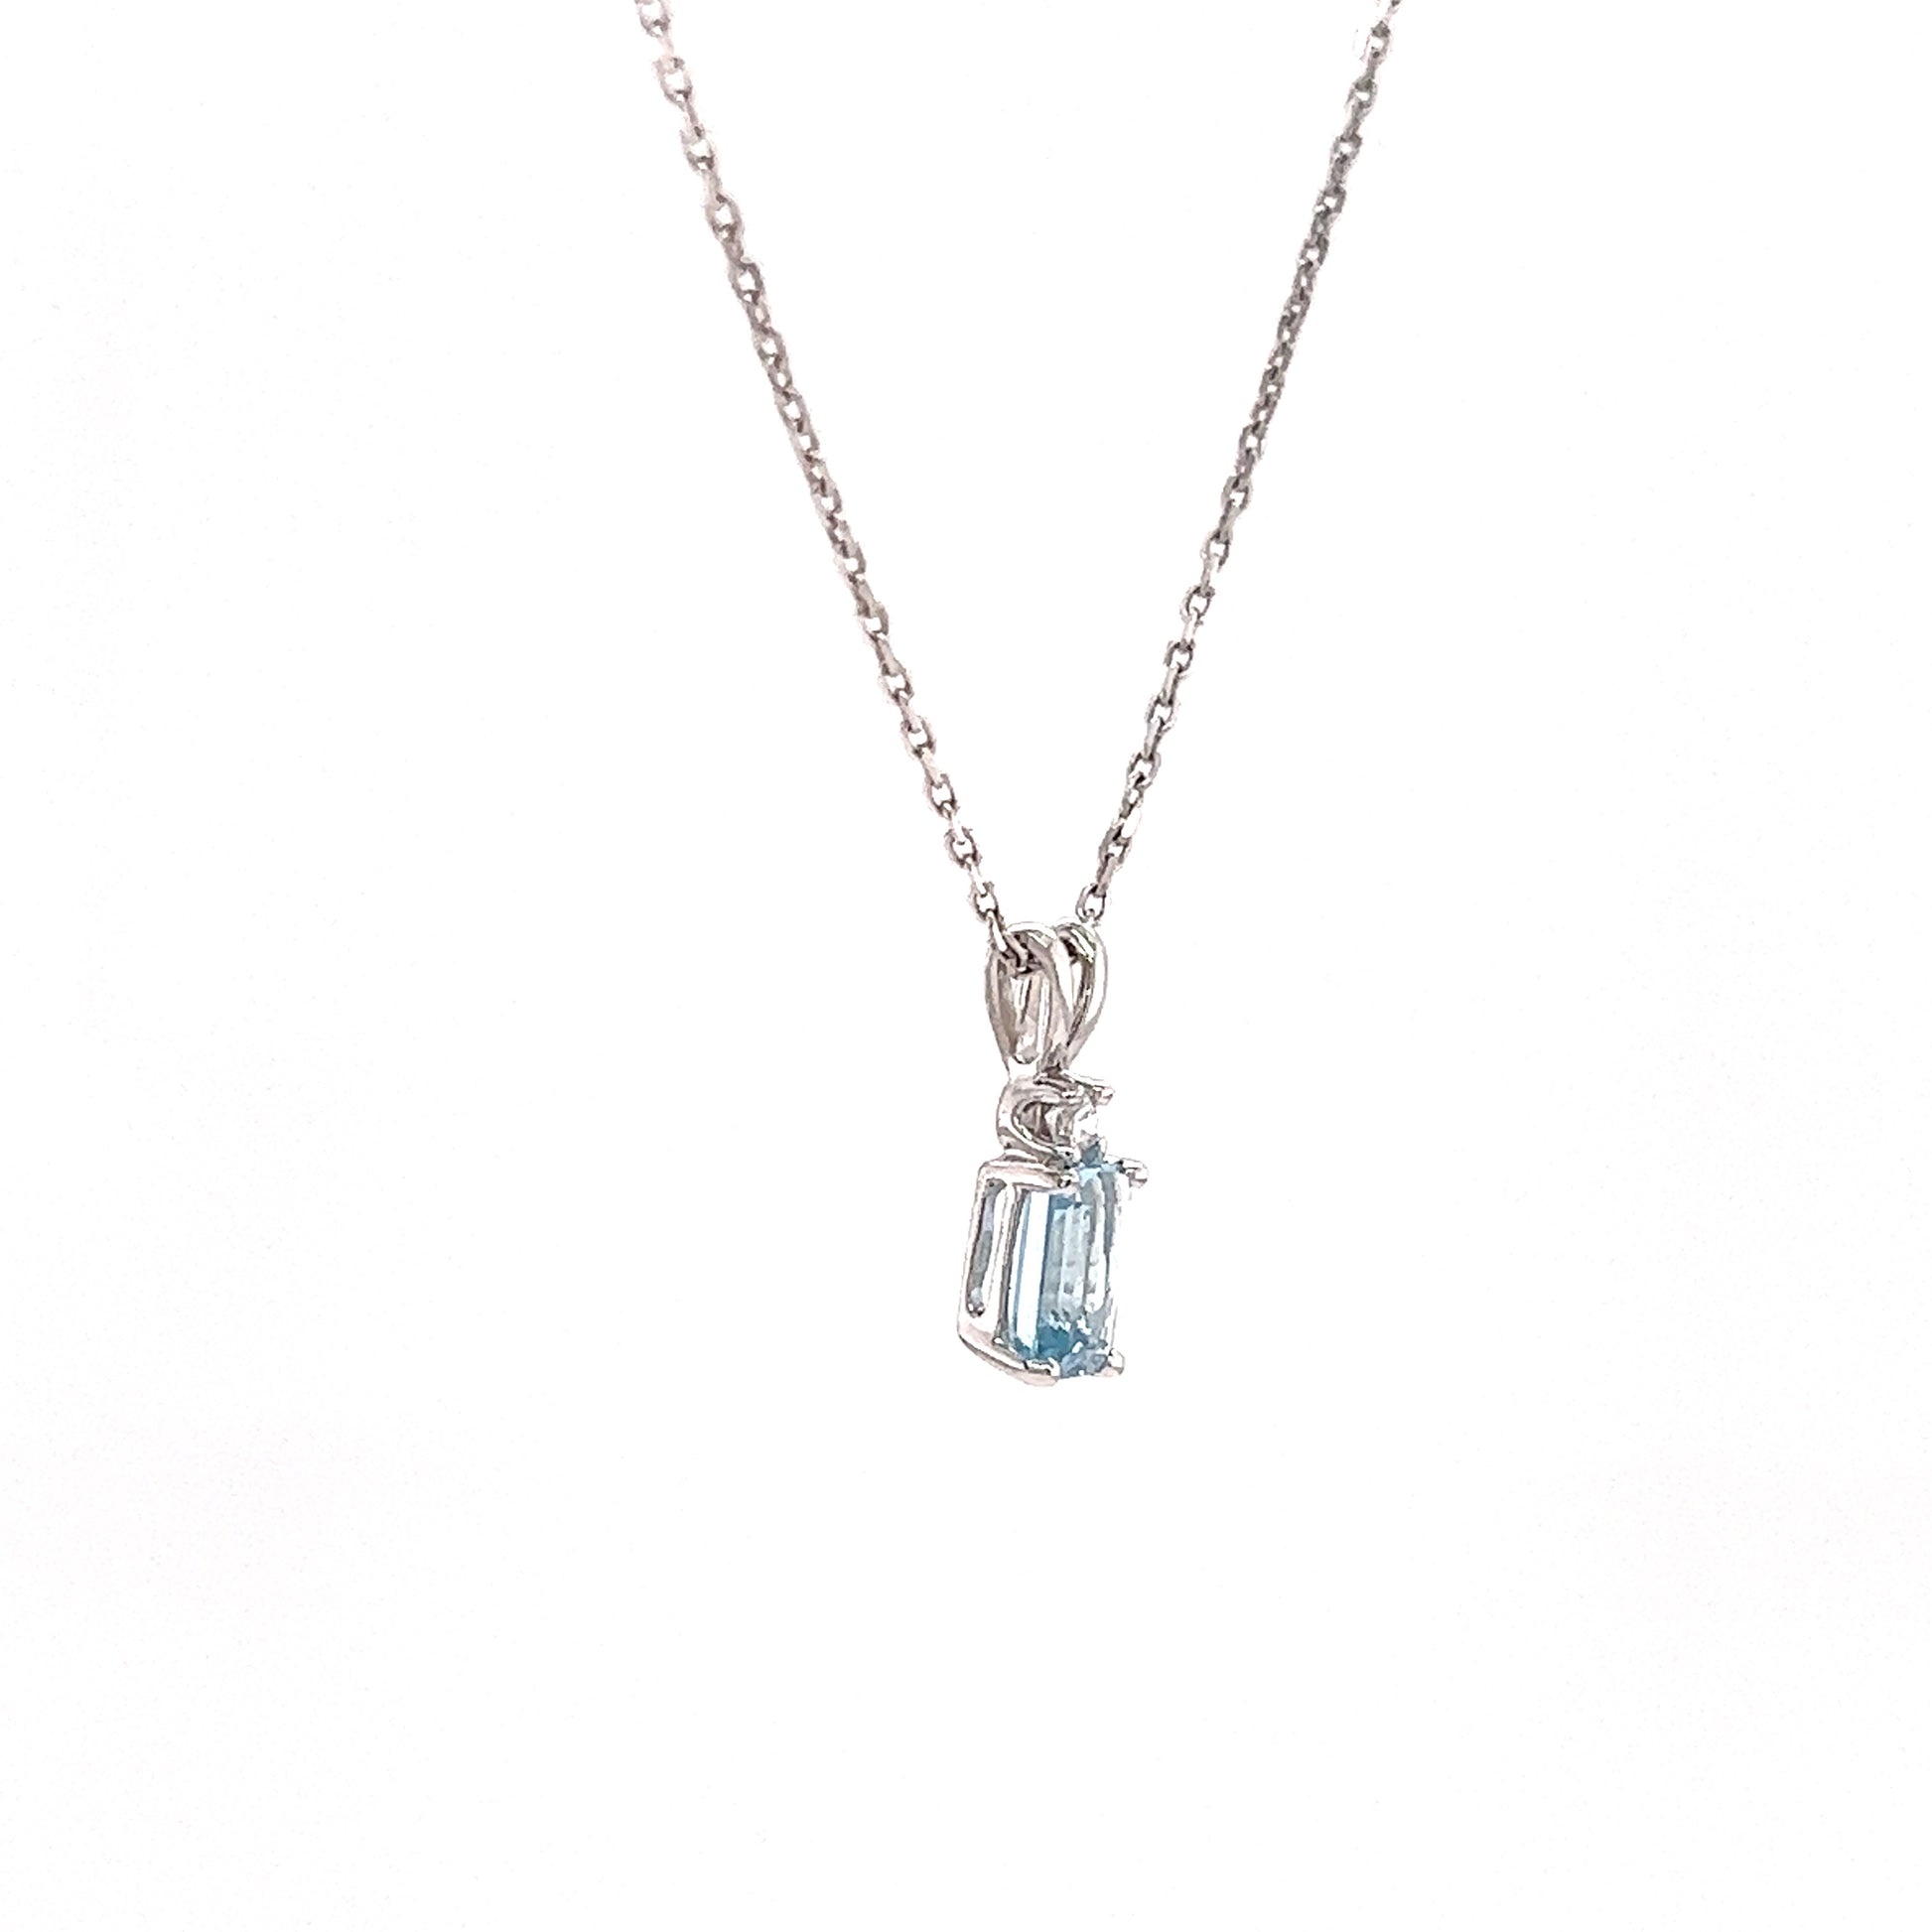 Baguette Aquamarine Pendant with One Side Diamond in 14K White Gold Left Side View with Chain